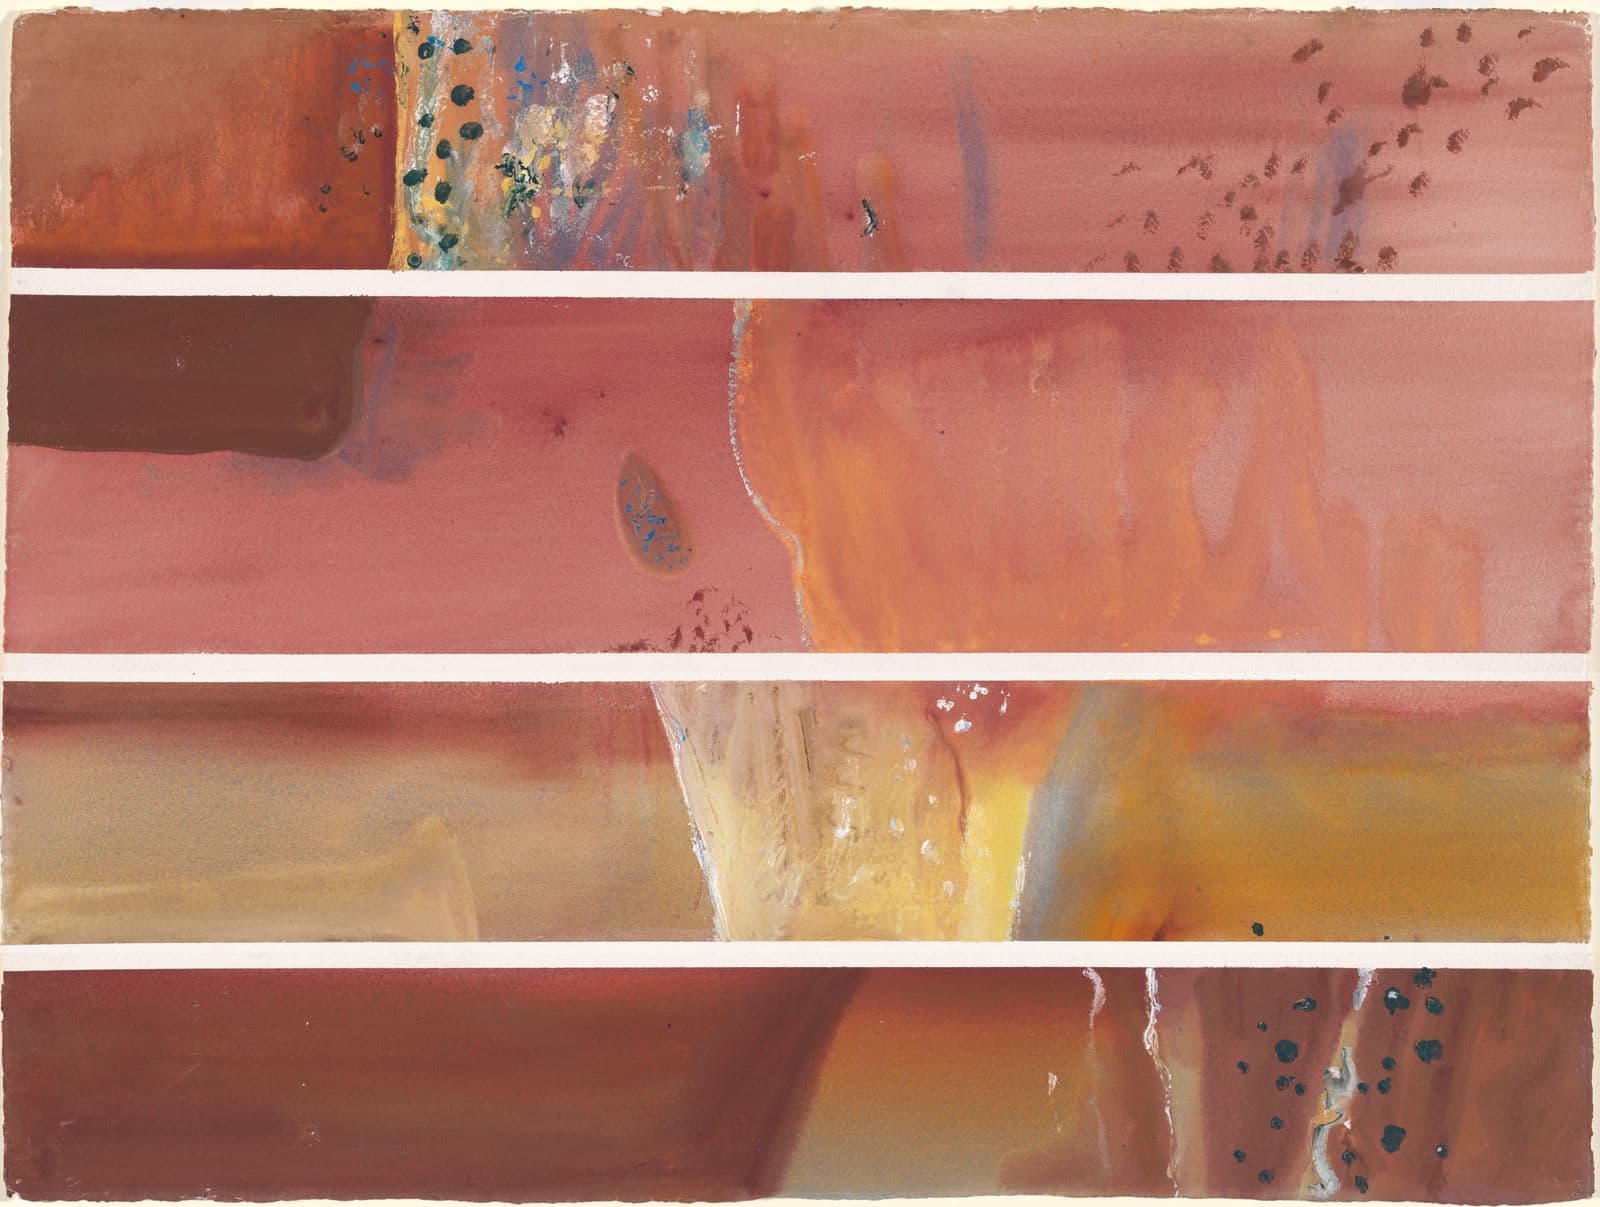 An abstract work of four segments of peach, pink and yellow tones separated horizontally by thick white dividing lines